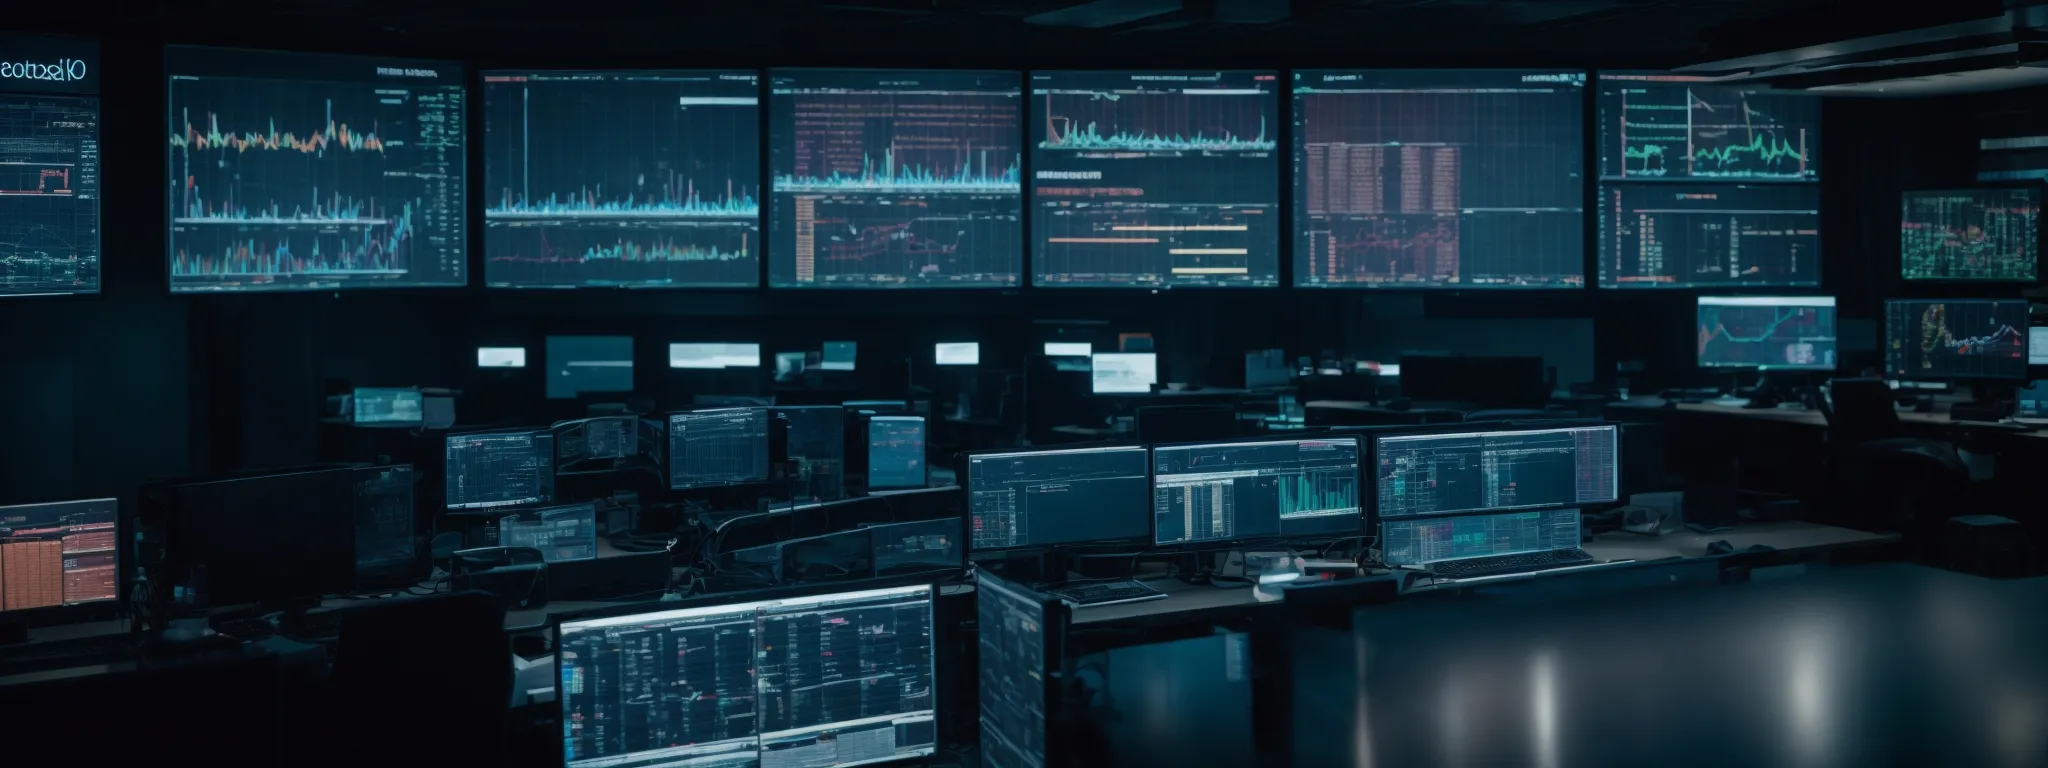 a high-tech control room with large monitors displaying data analytics and digital marketing metrics.